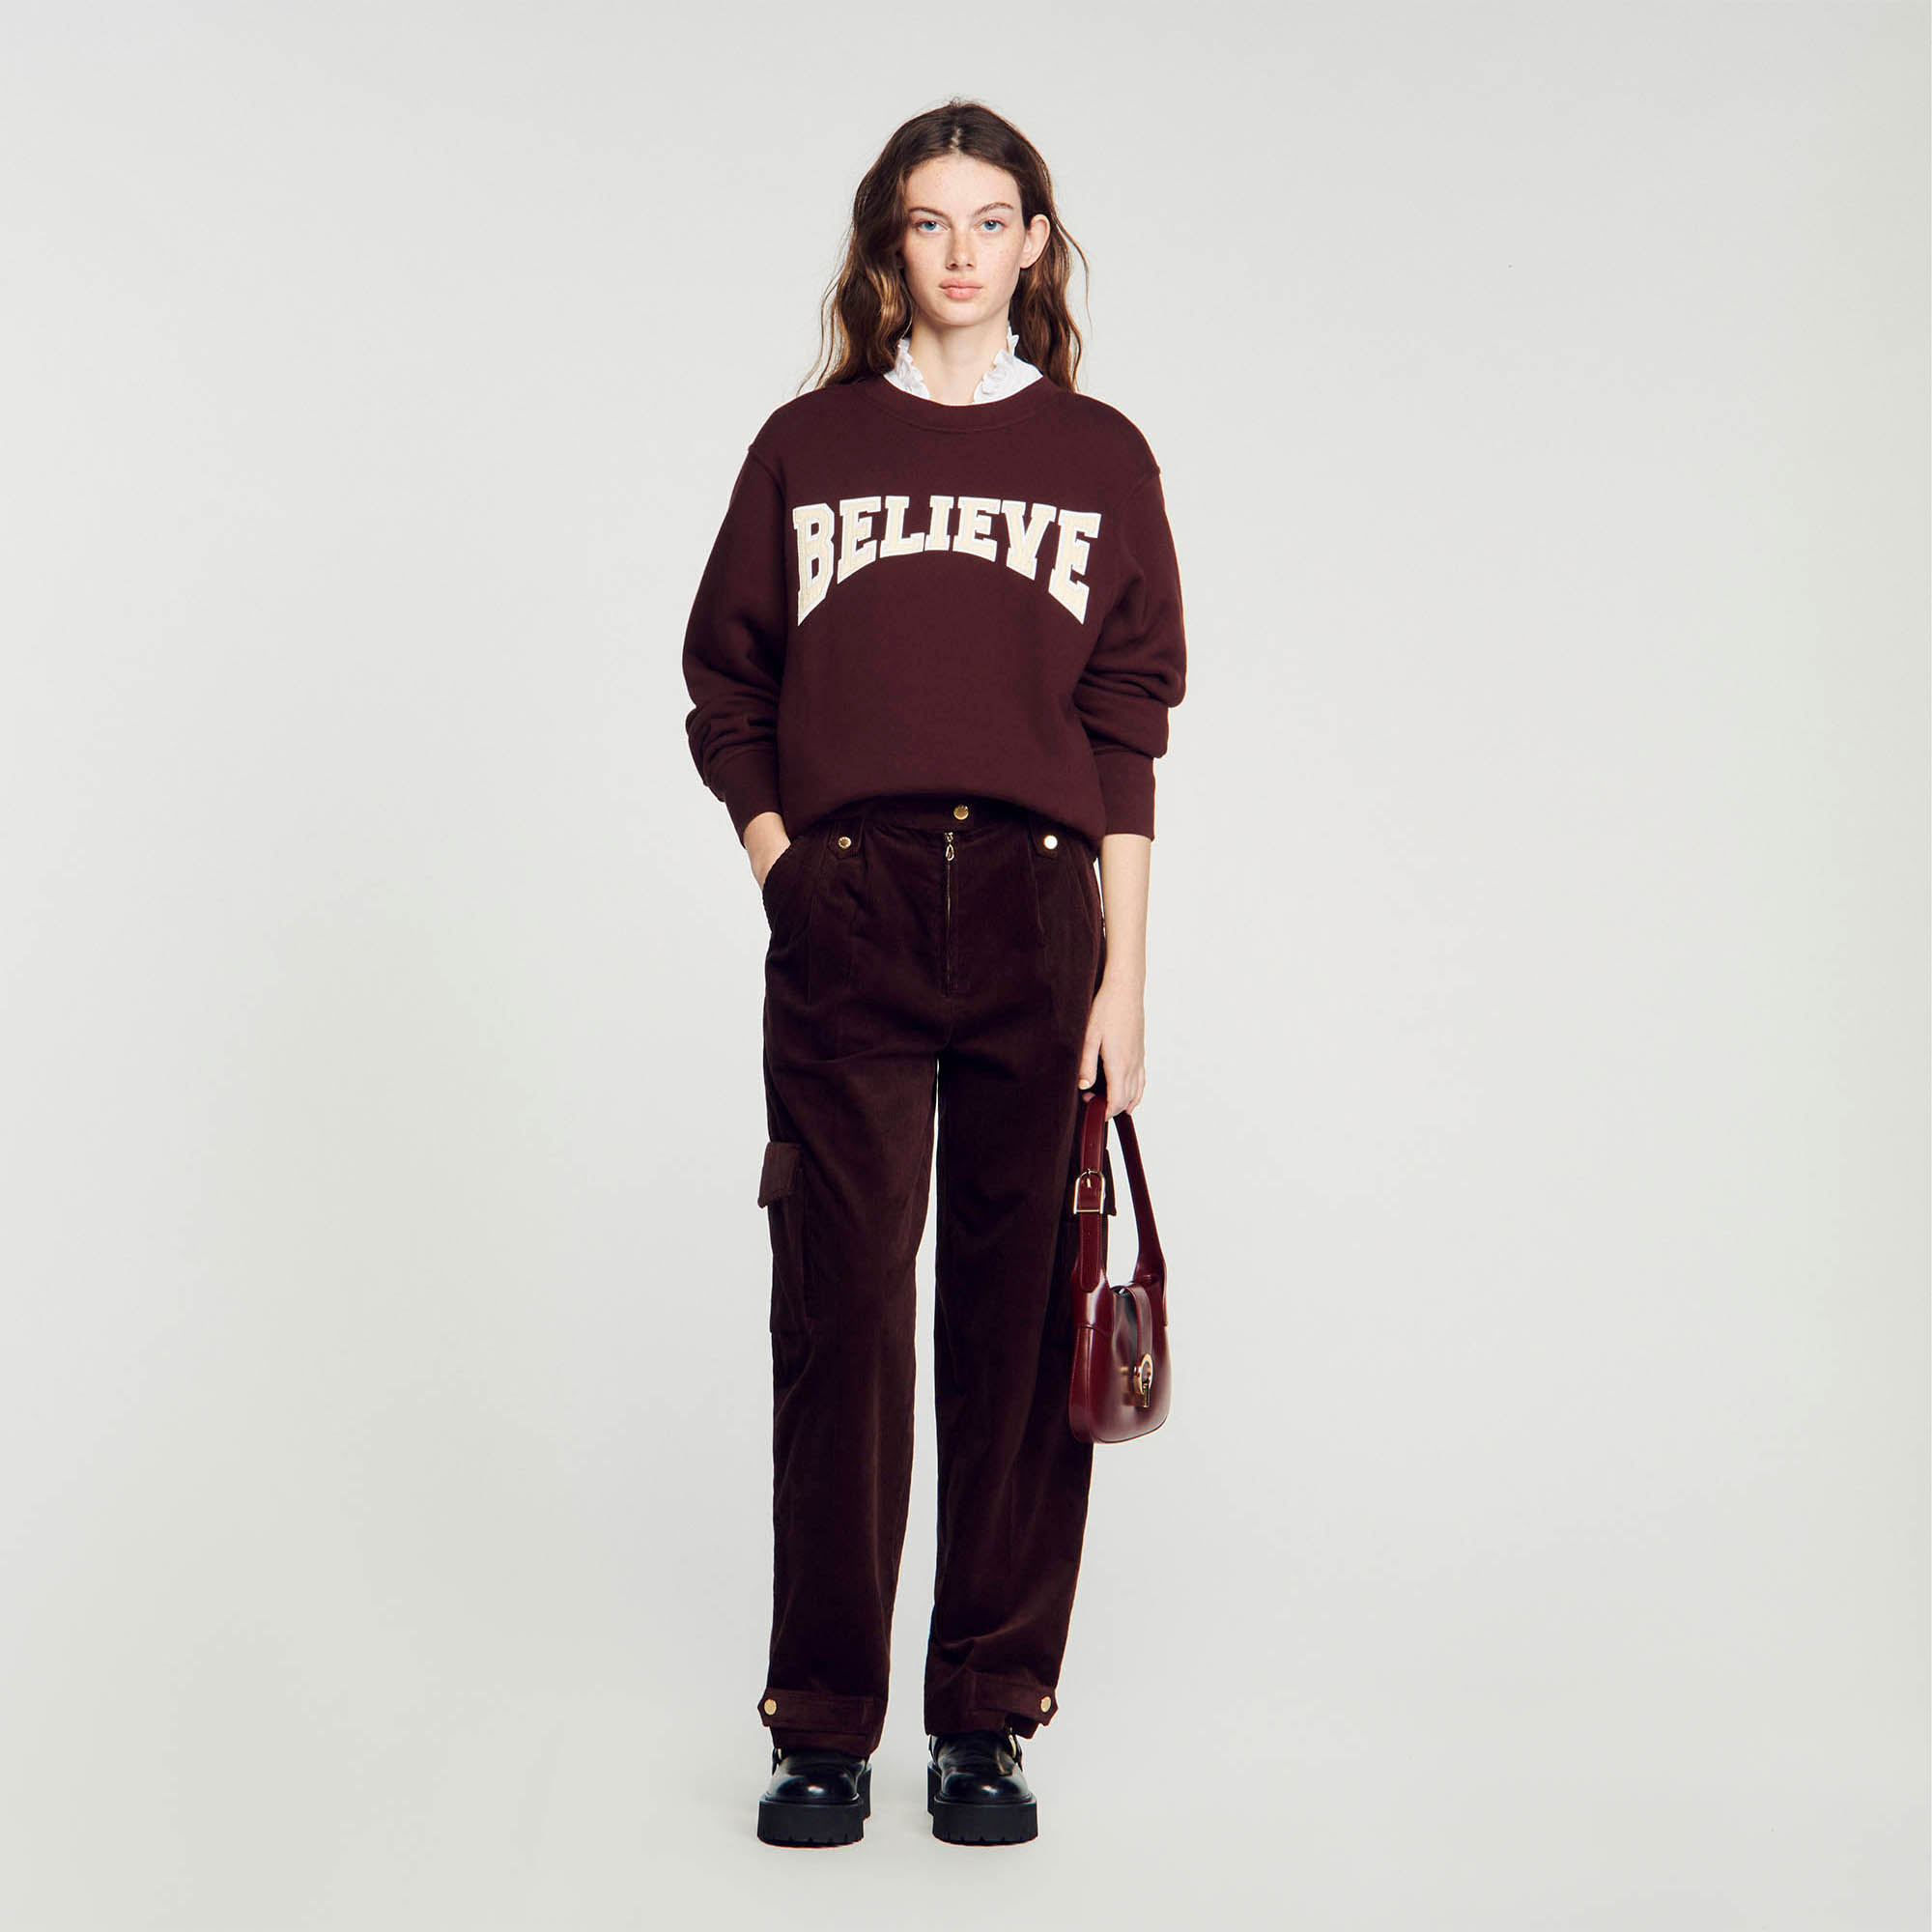 Sandro cotton Embroidery: Fleece sweatshirt with round neck and long sleeves, embellished with Believe contrast patches on the chest